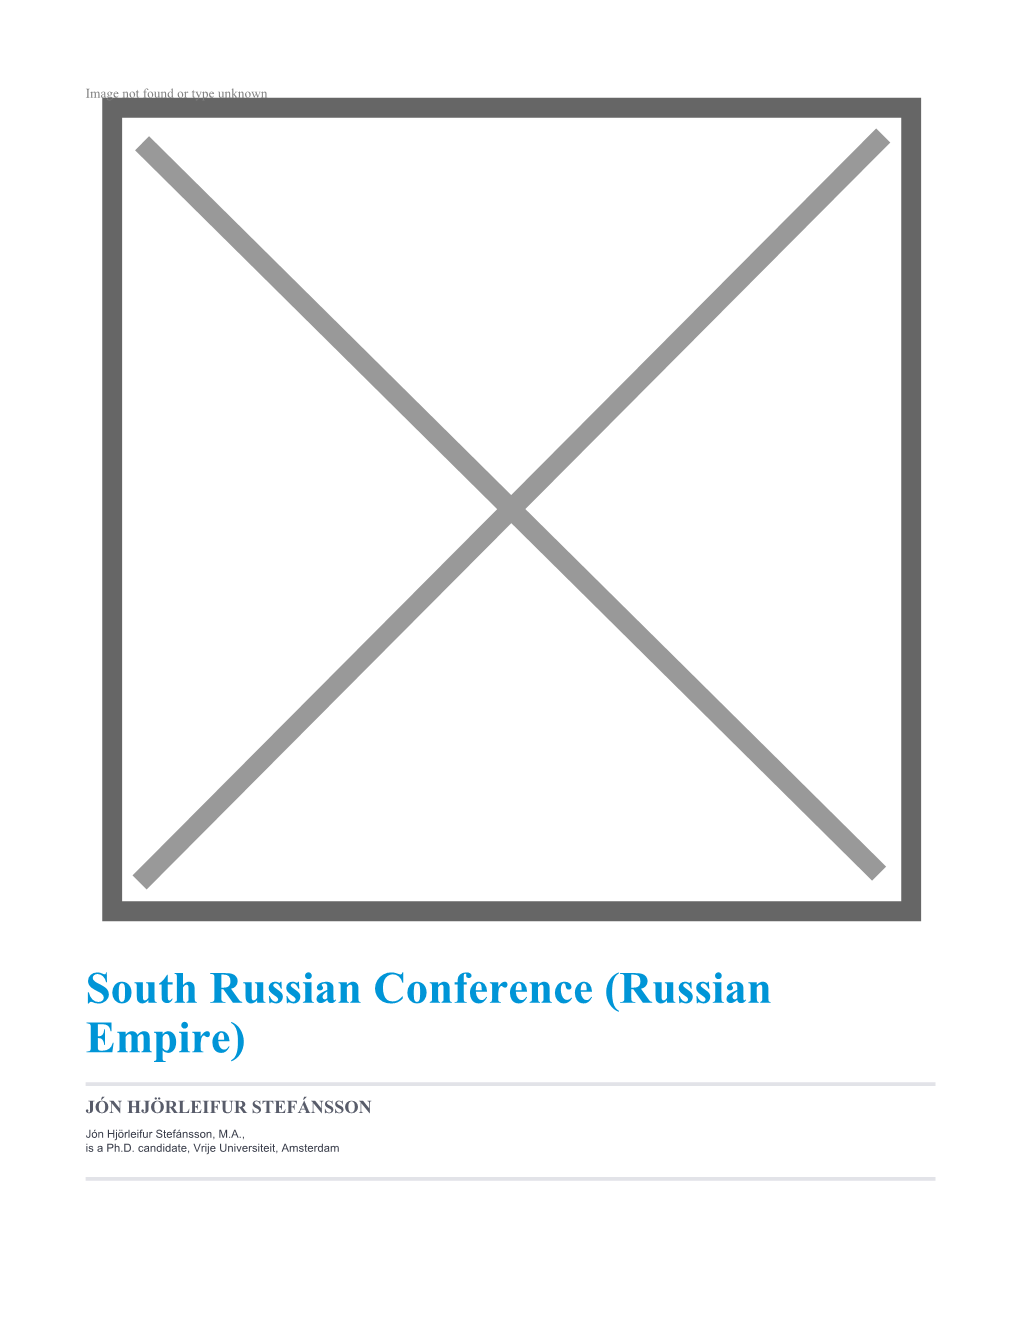 South Russian Conference (Russian Empire)